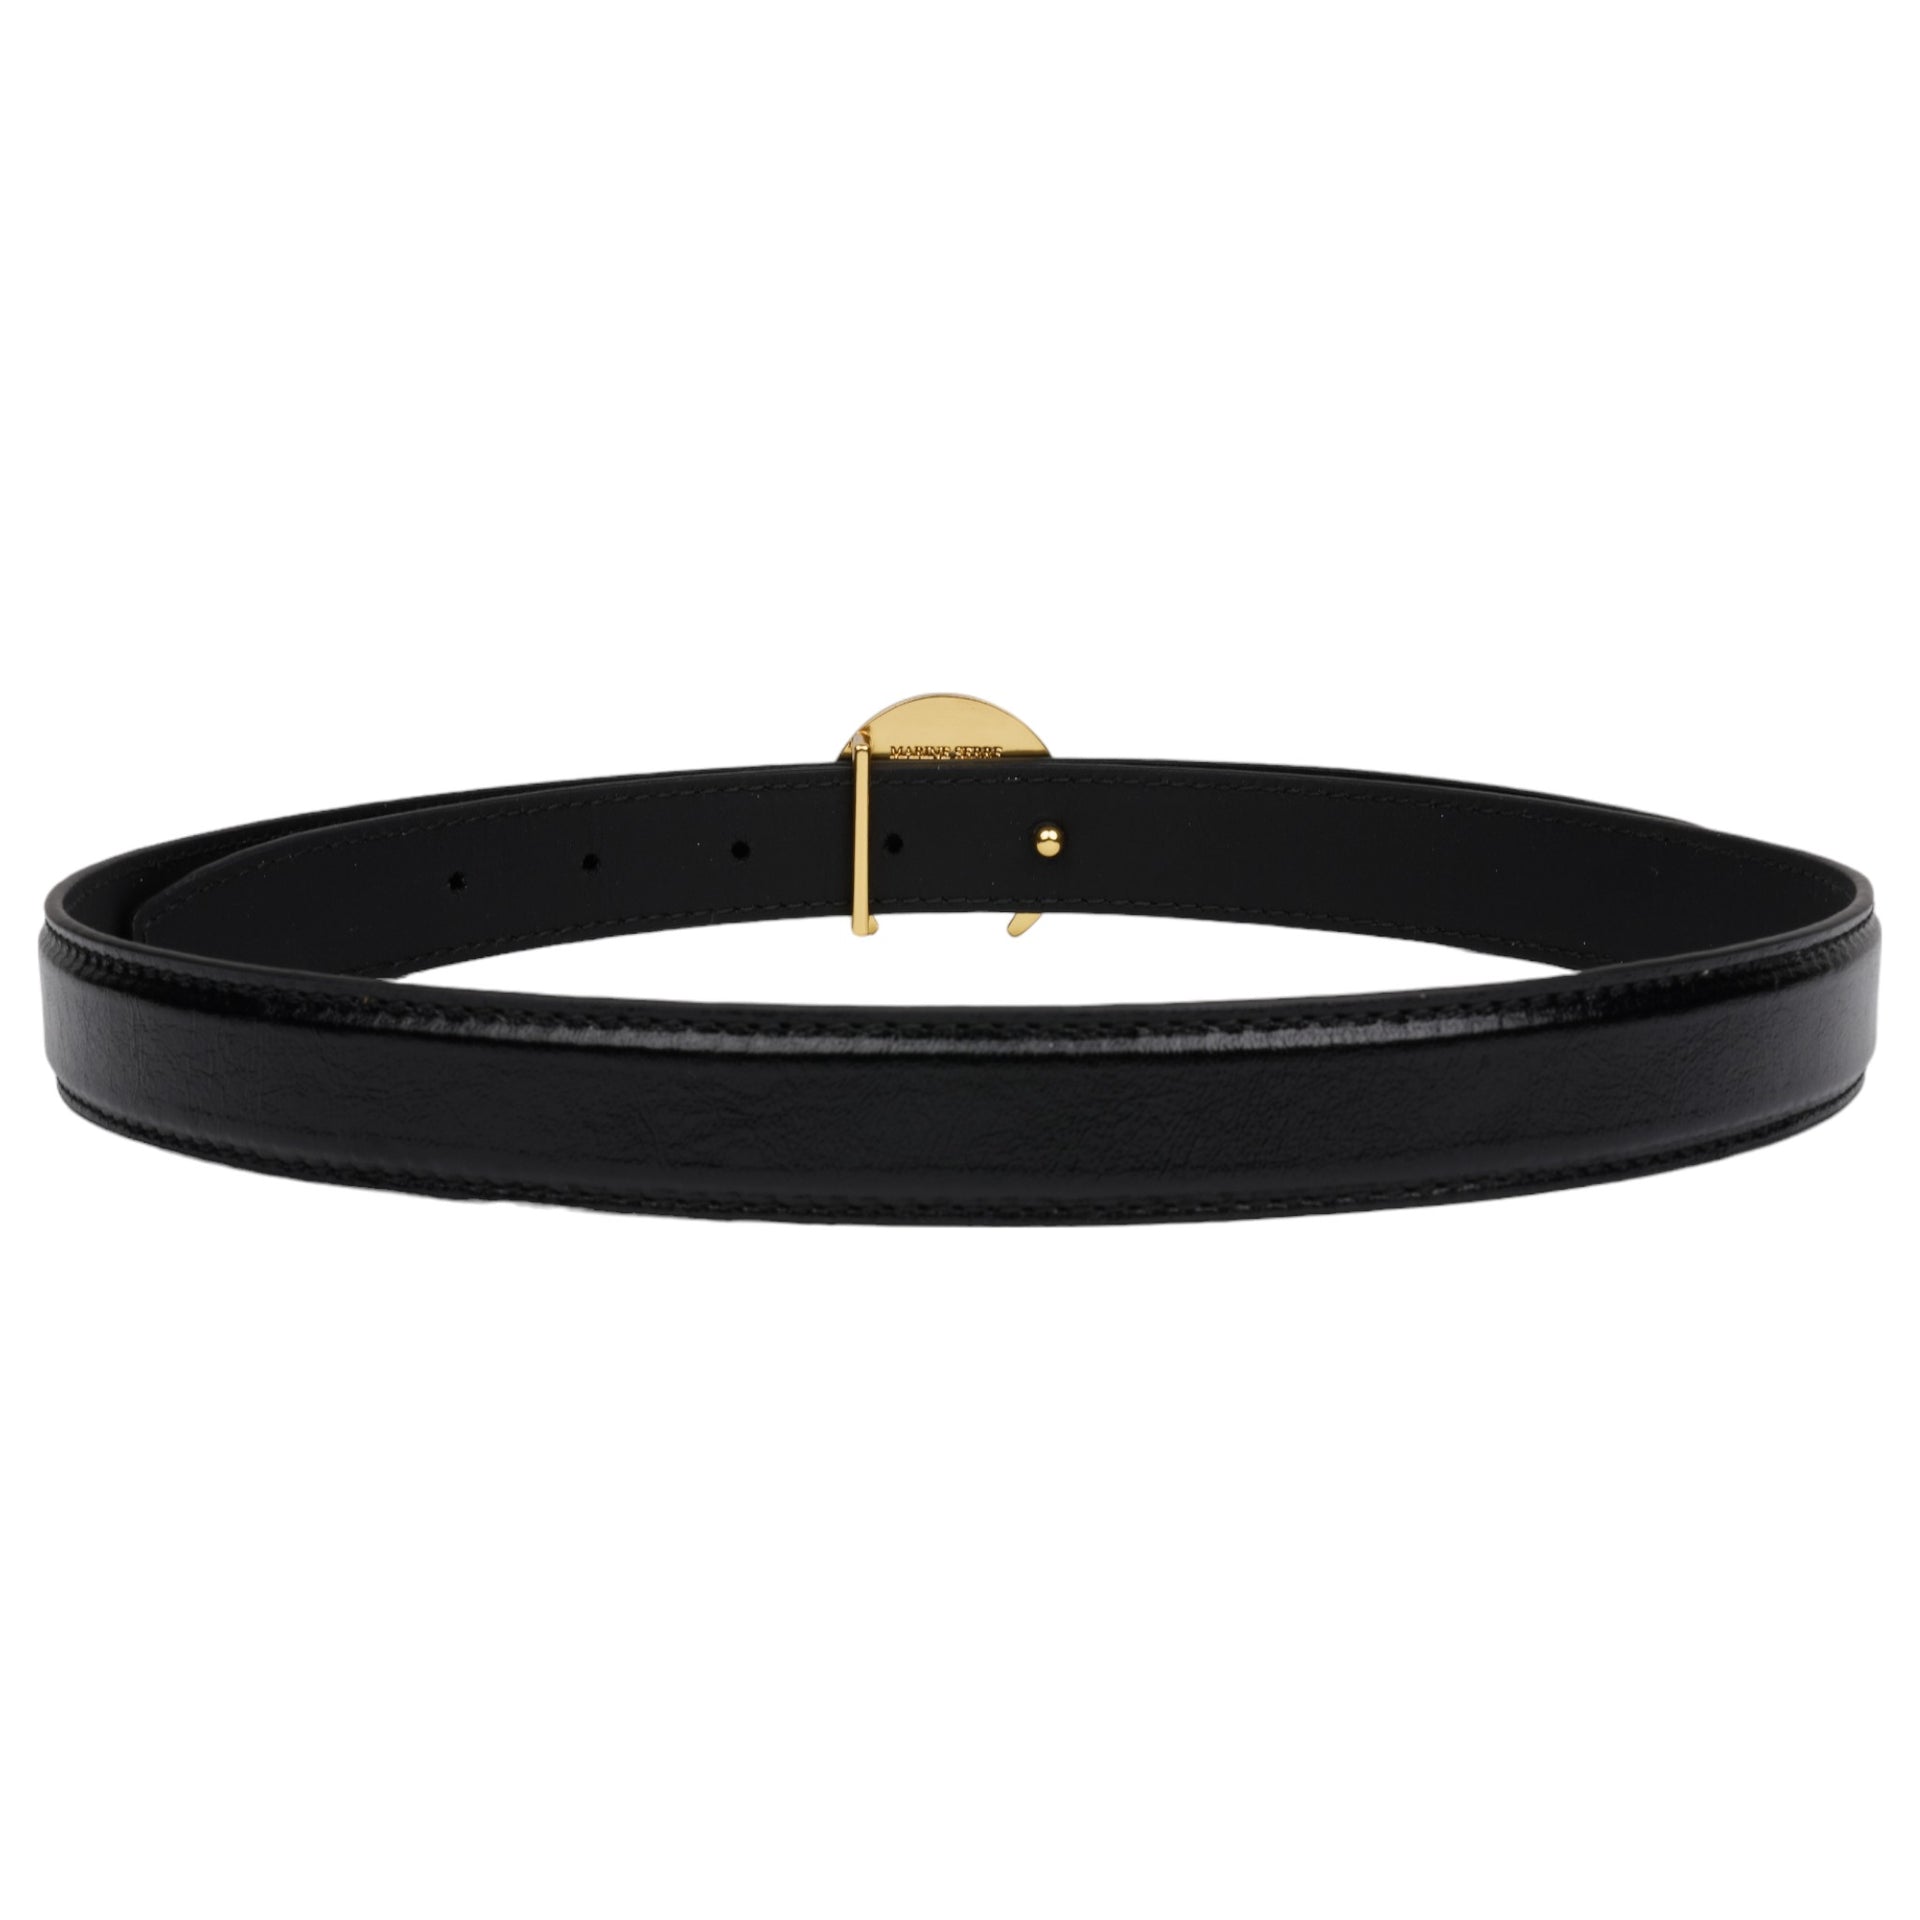 RECYCLED LEATHER BUCKLE BELT / BK99:BLACK